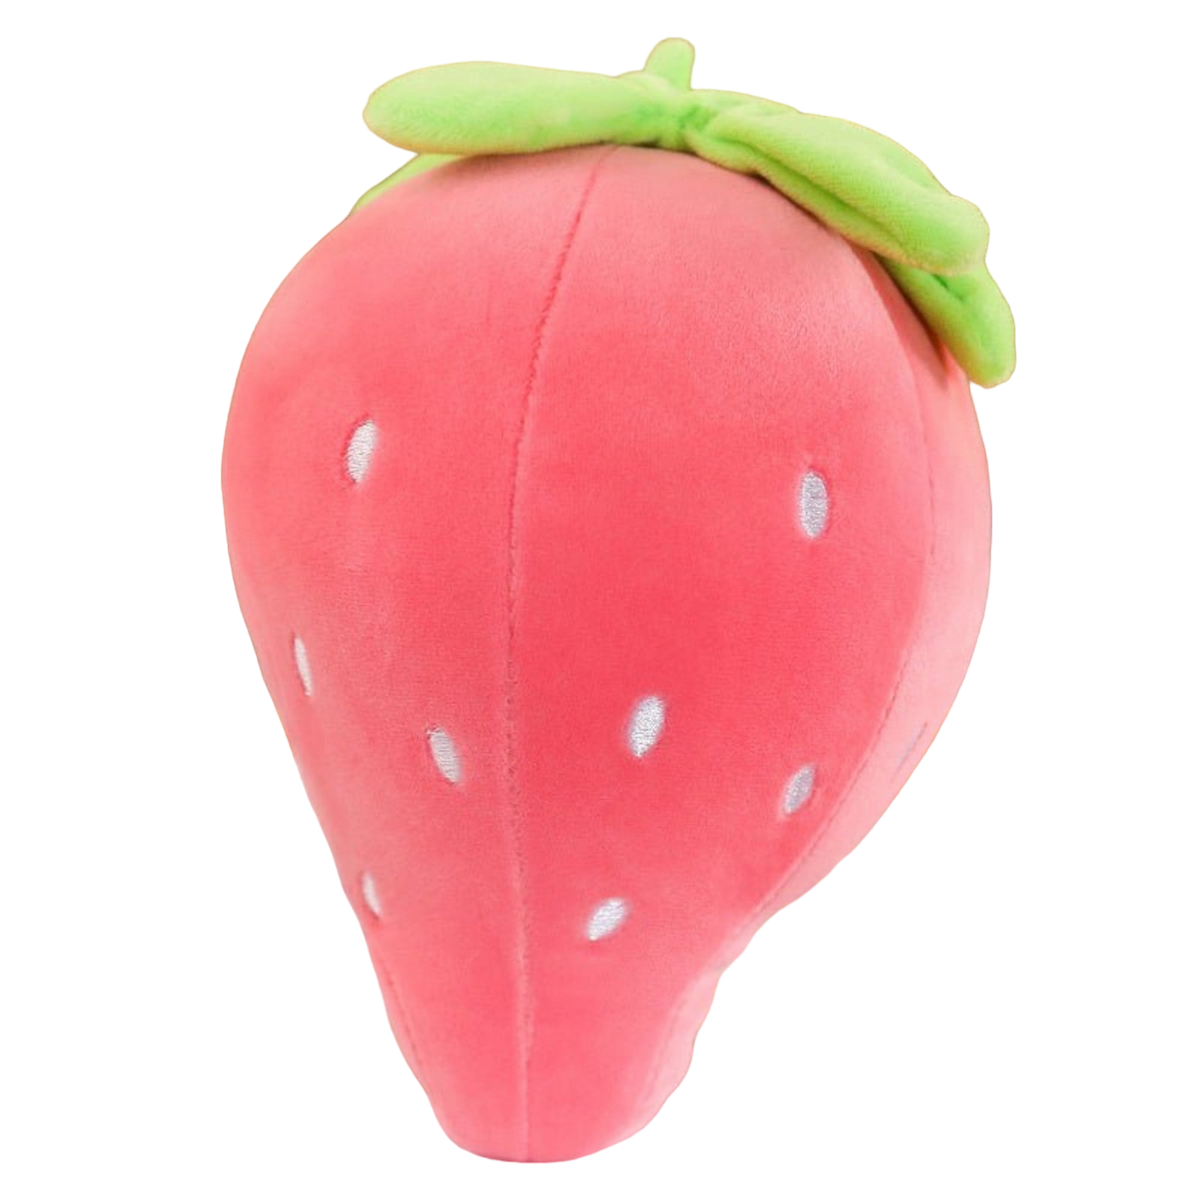 Fruit Plushies - Watermelon, Pineapple and Cherry Soft Toys for Kids,  Adults and Babies